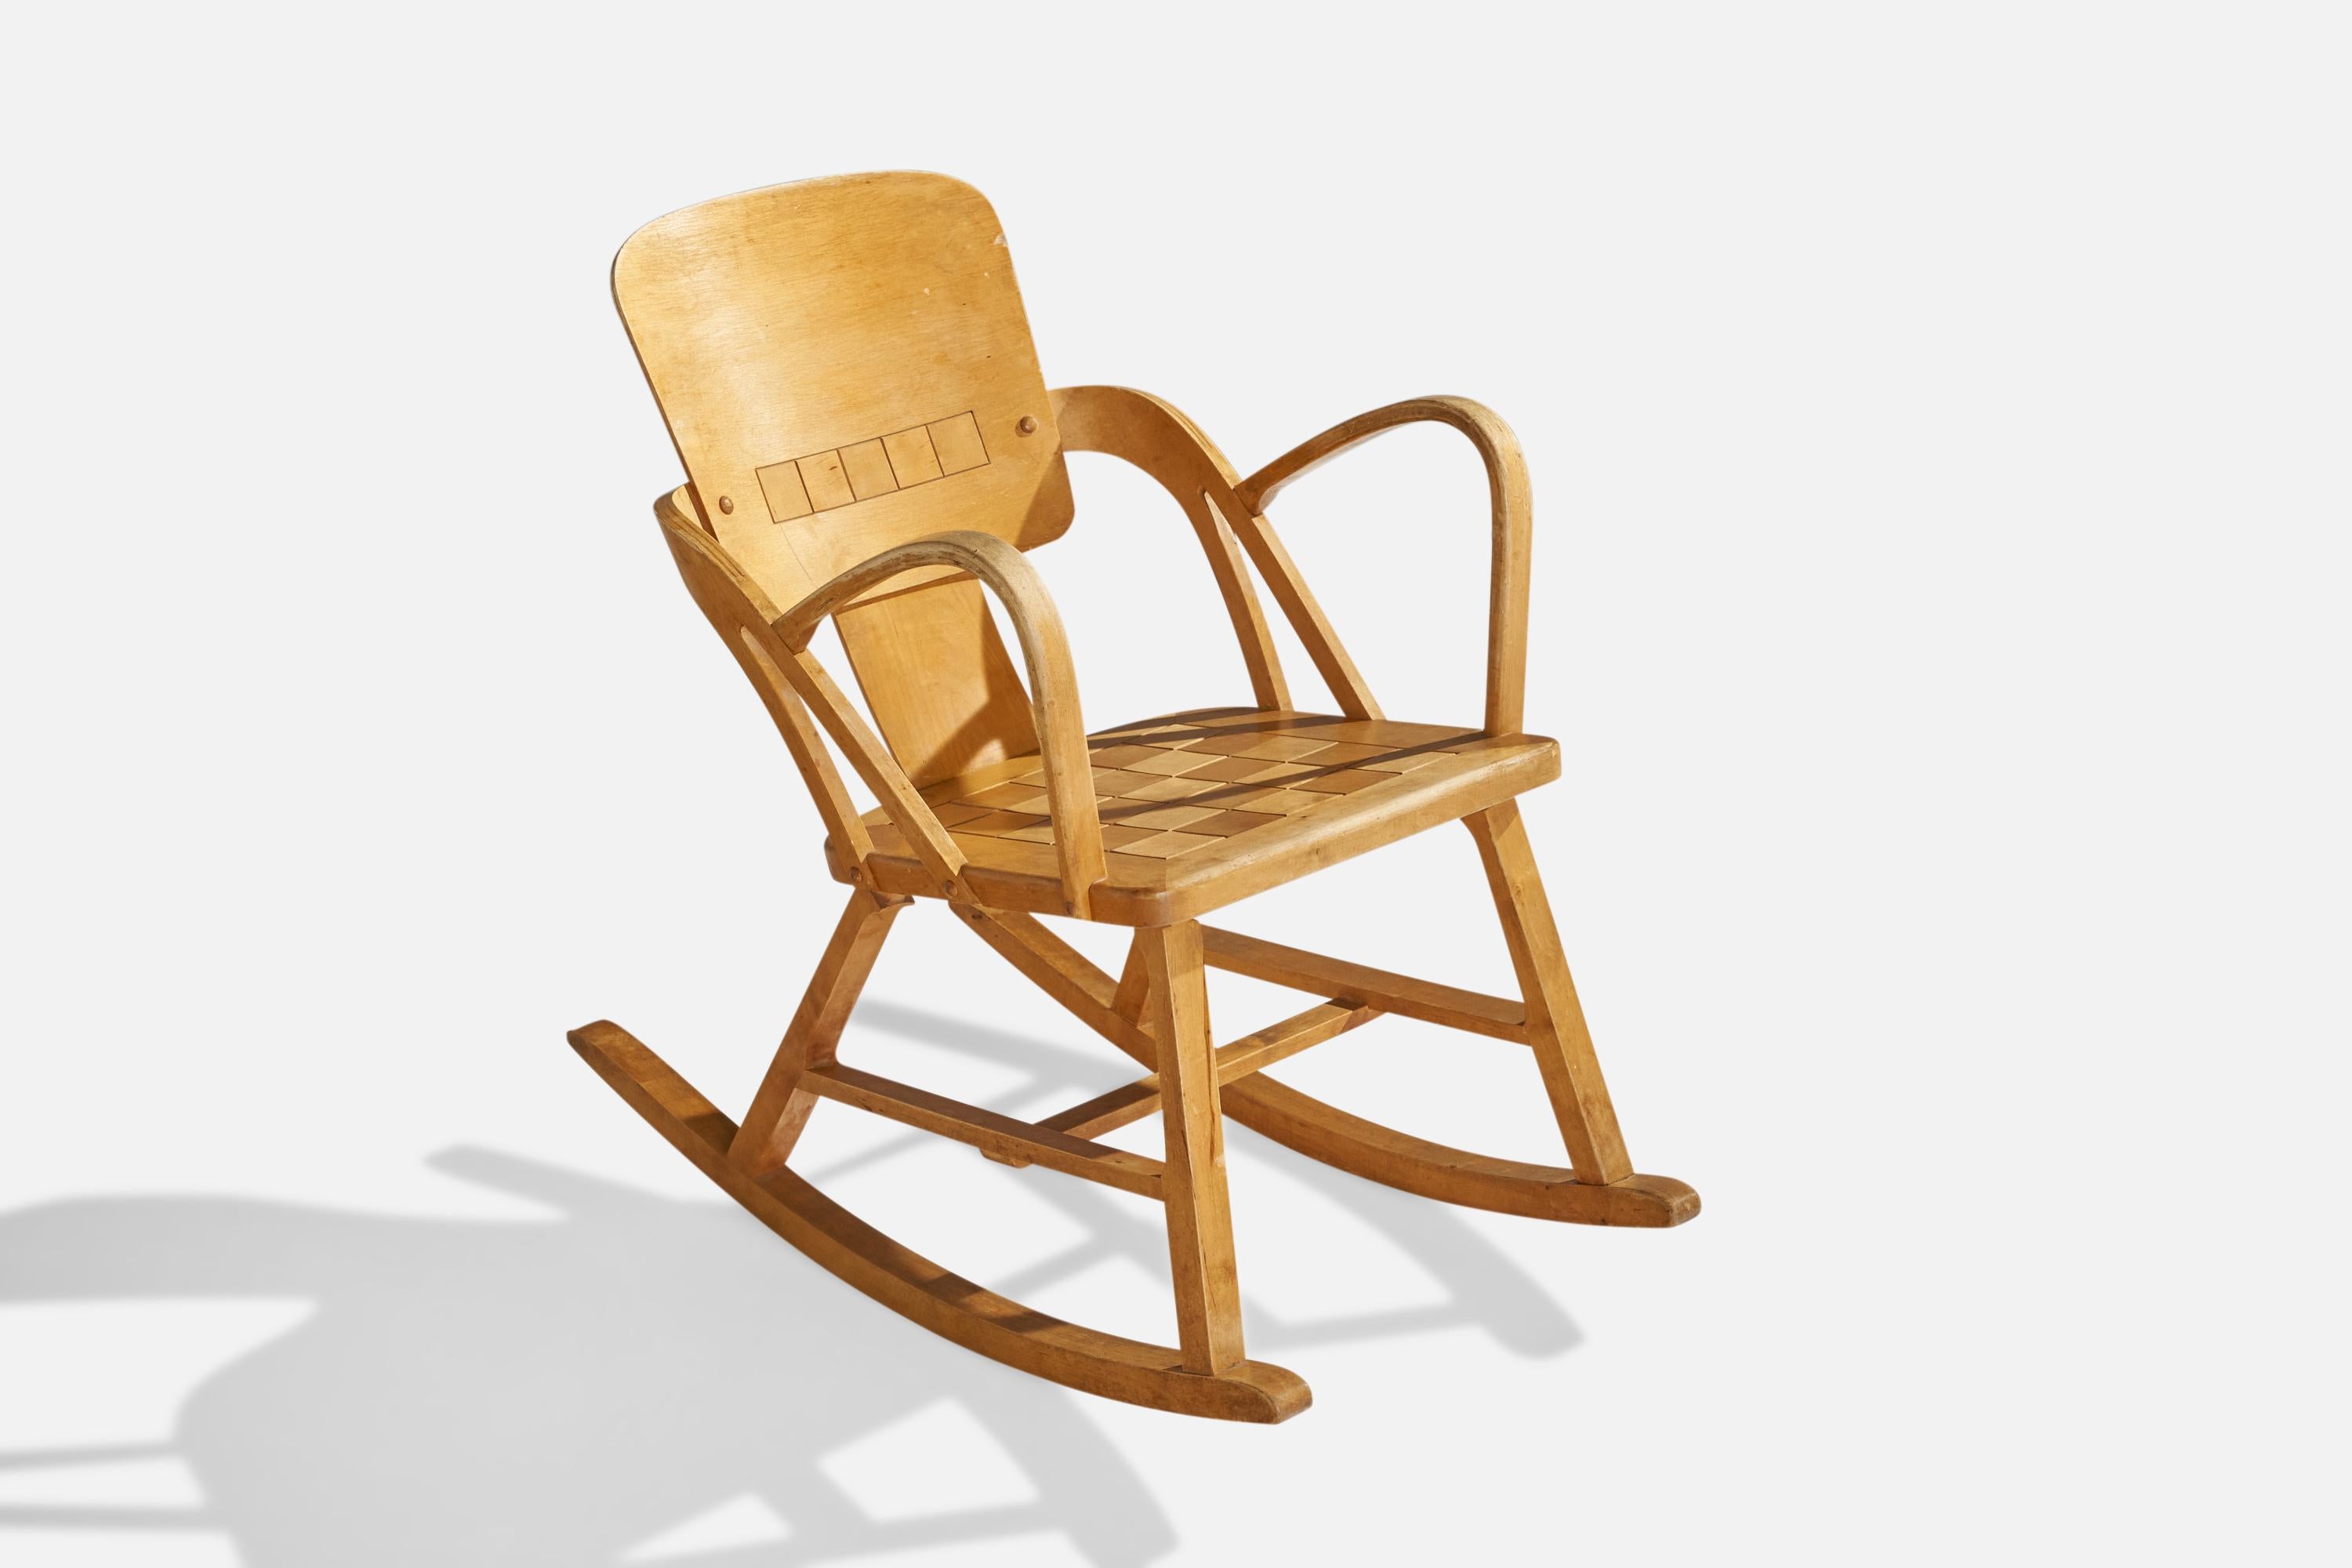 A birch rocking chair designed by Per Aaslid and produced by Aaslid Møbelfabrikk, Fyrde, Volda, Norway, c. 1950s.

seat height: 16.5